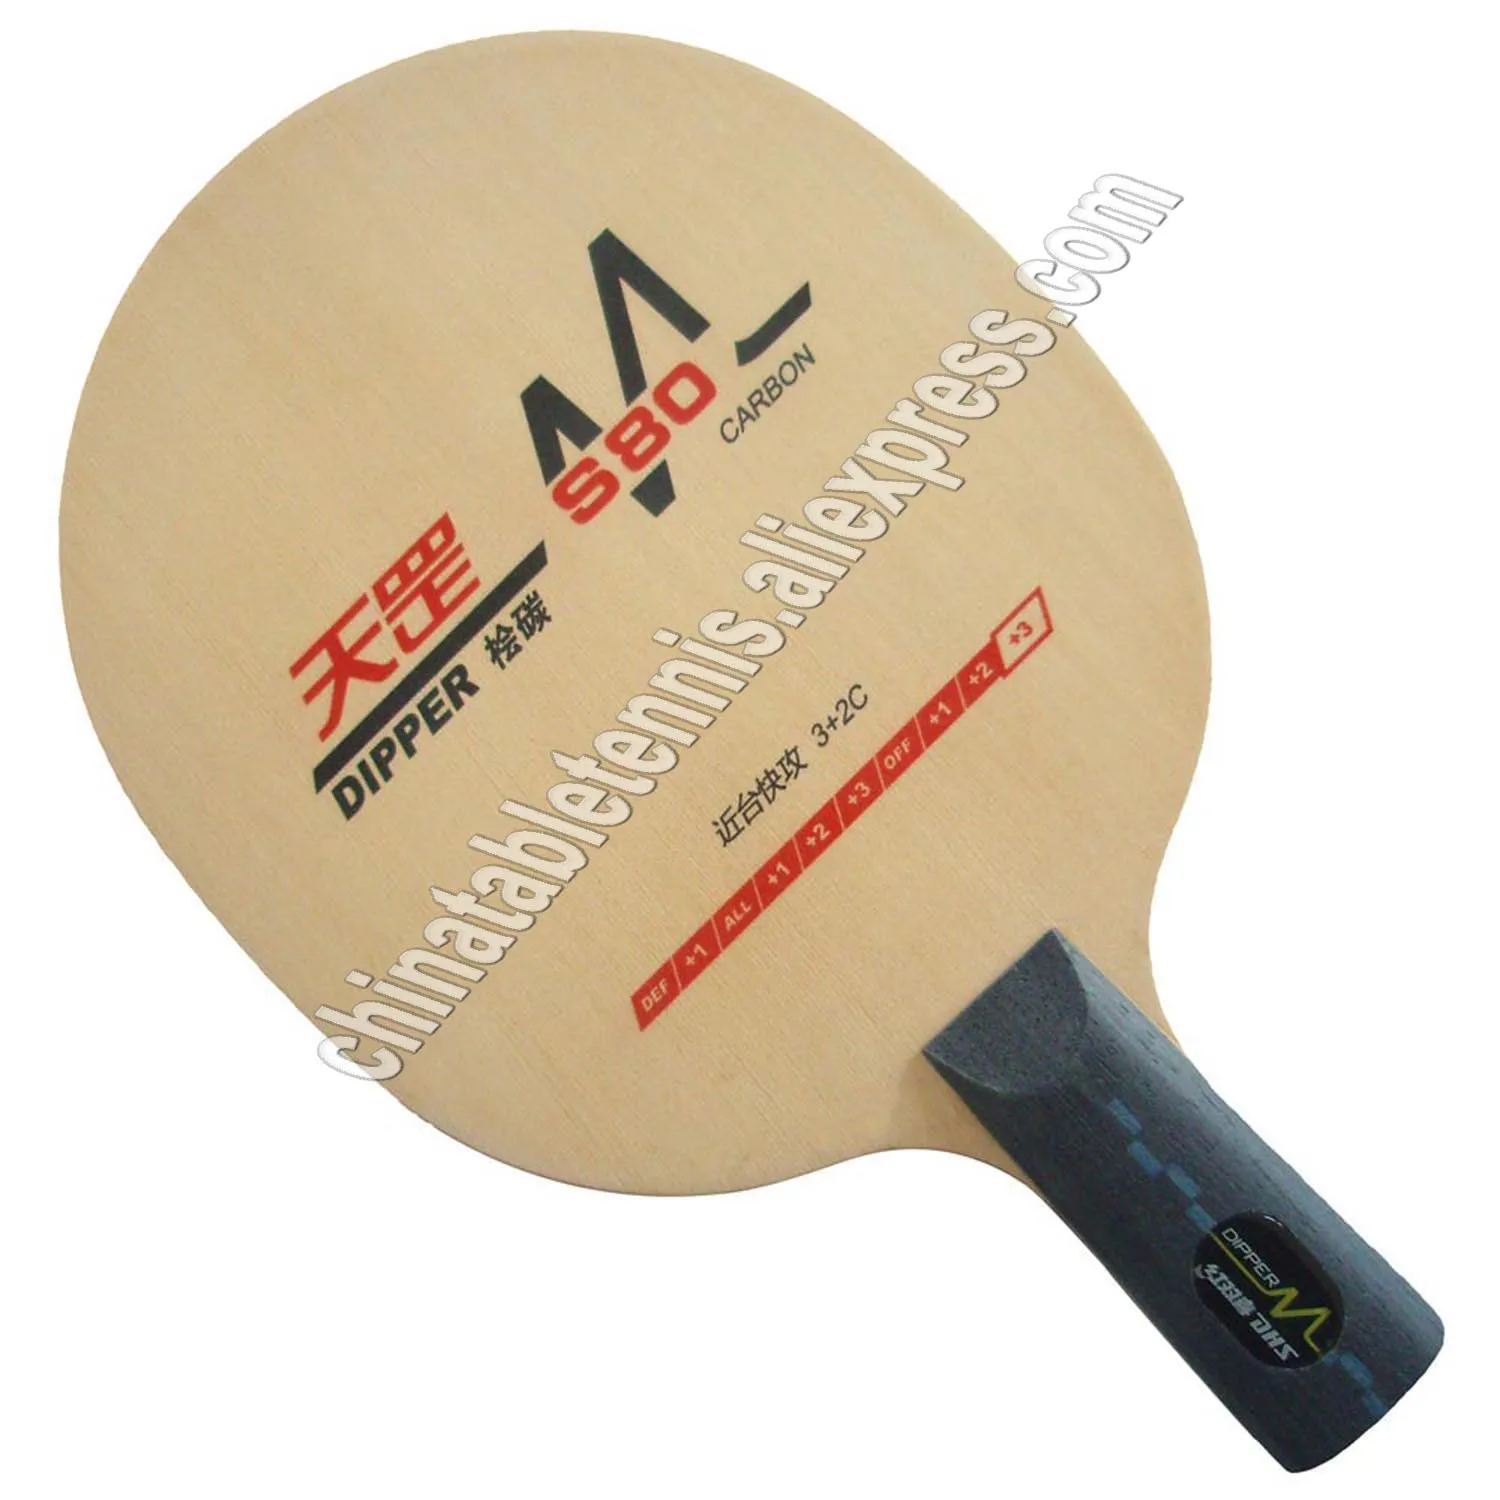 DHS DIPPER DM.S80 Table Tennis Ping Pong Blade OFF+++ Quick-attack plus loop